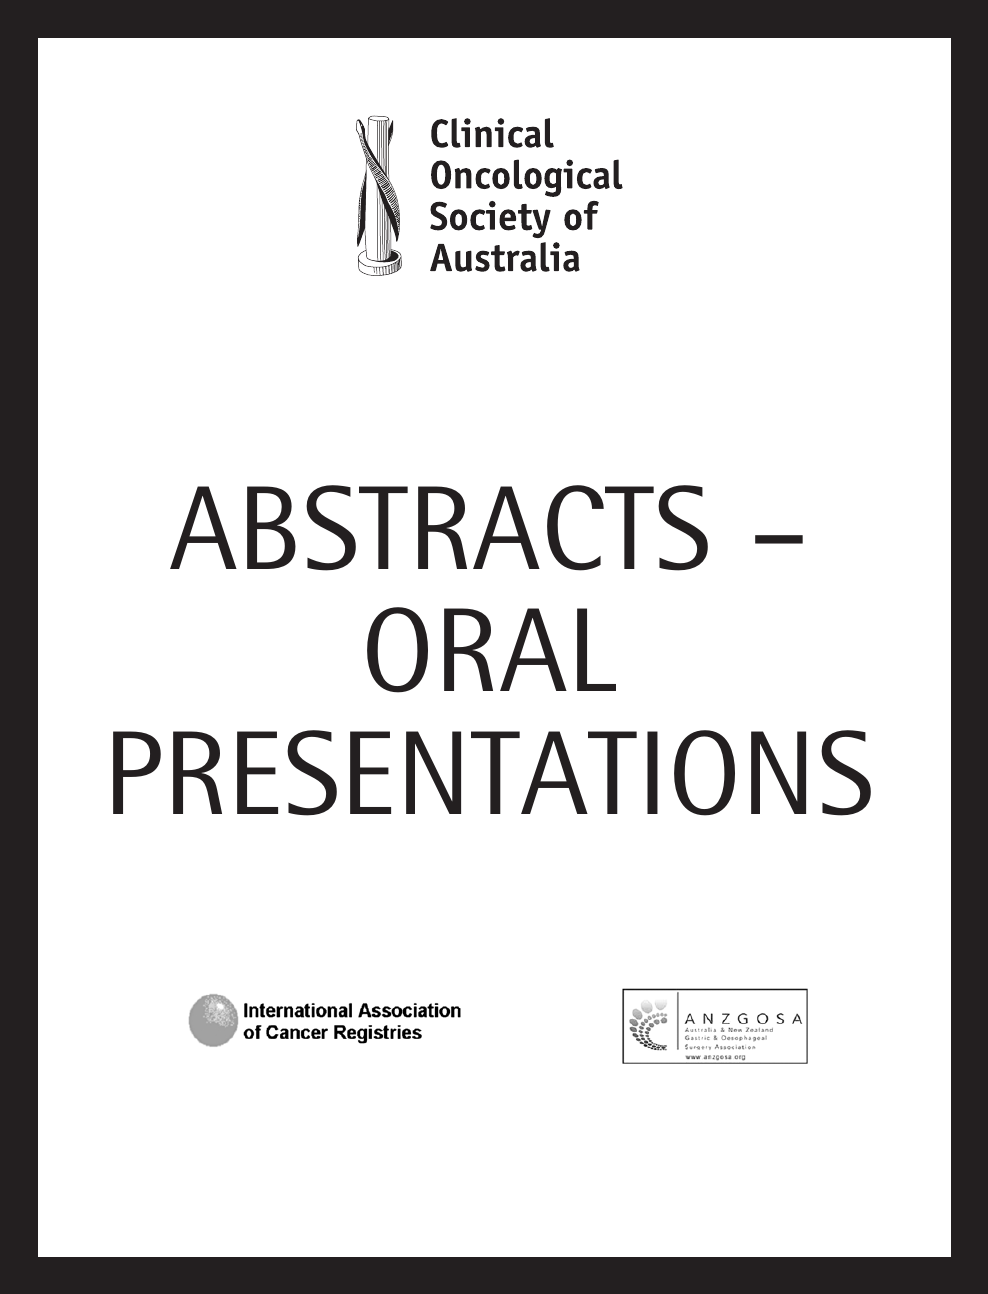 Abstracts For Oral Presentations Topic Of Research Paper In Health Sciences Download Scholarly Article Pdf And Read For Free On Cyberleninka Open Science Hub